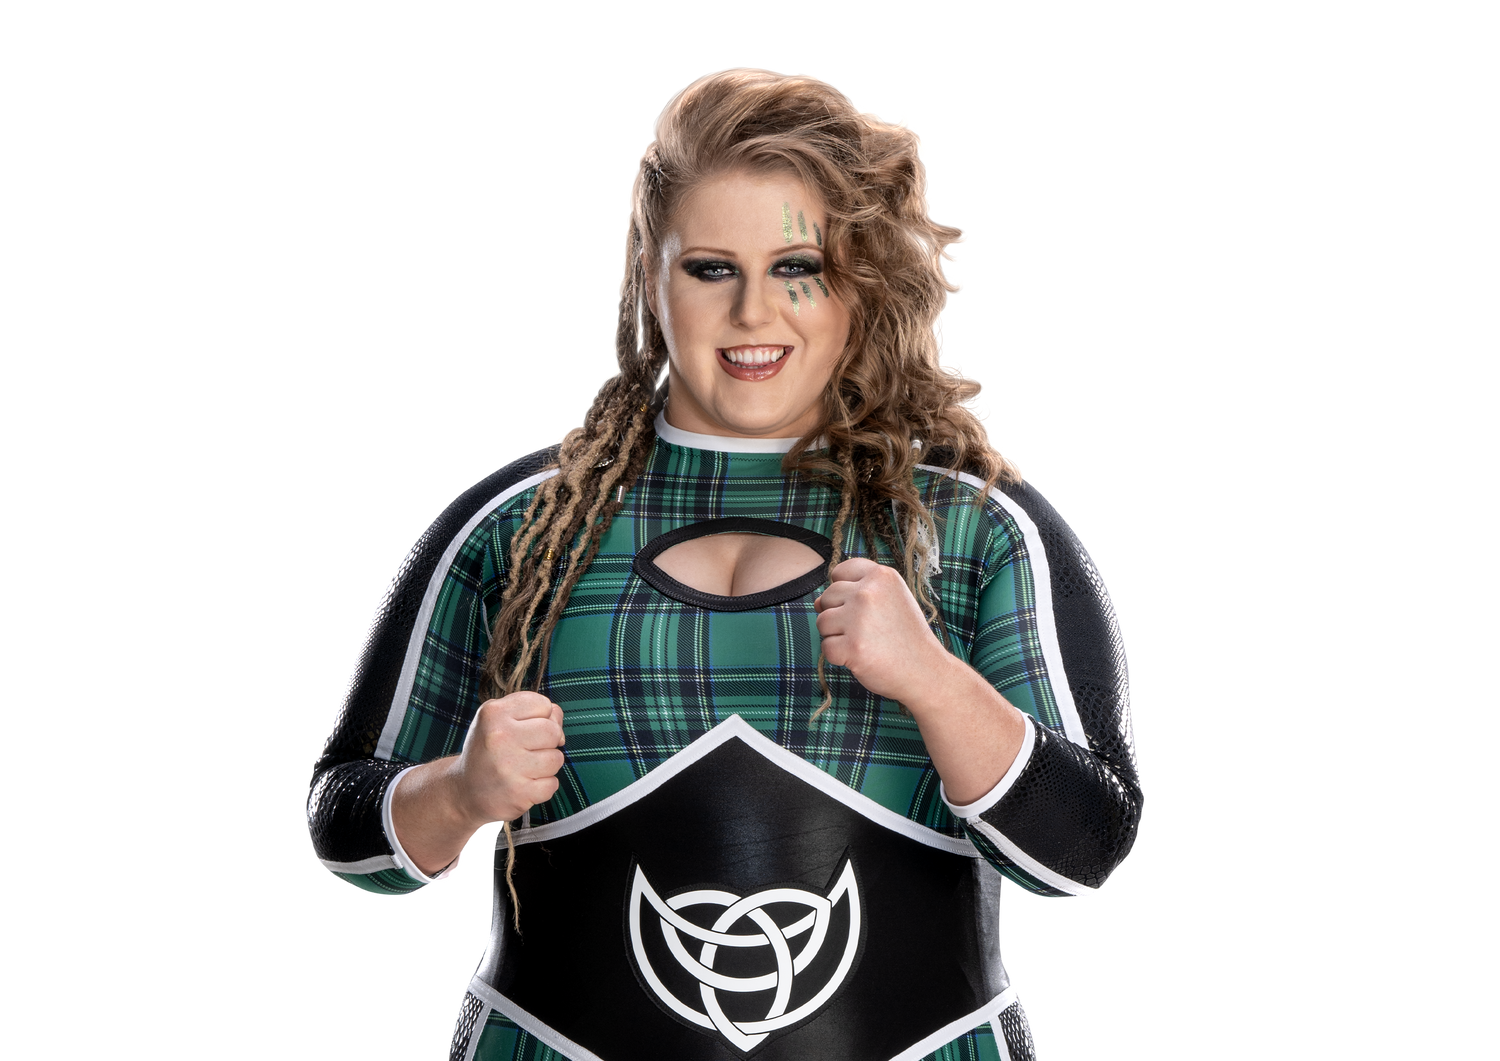 All Piper Niven [a.k.a. Doudrop] Wrestling Action Figures